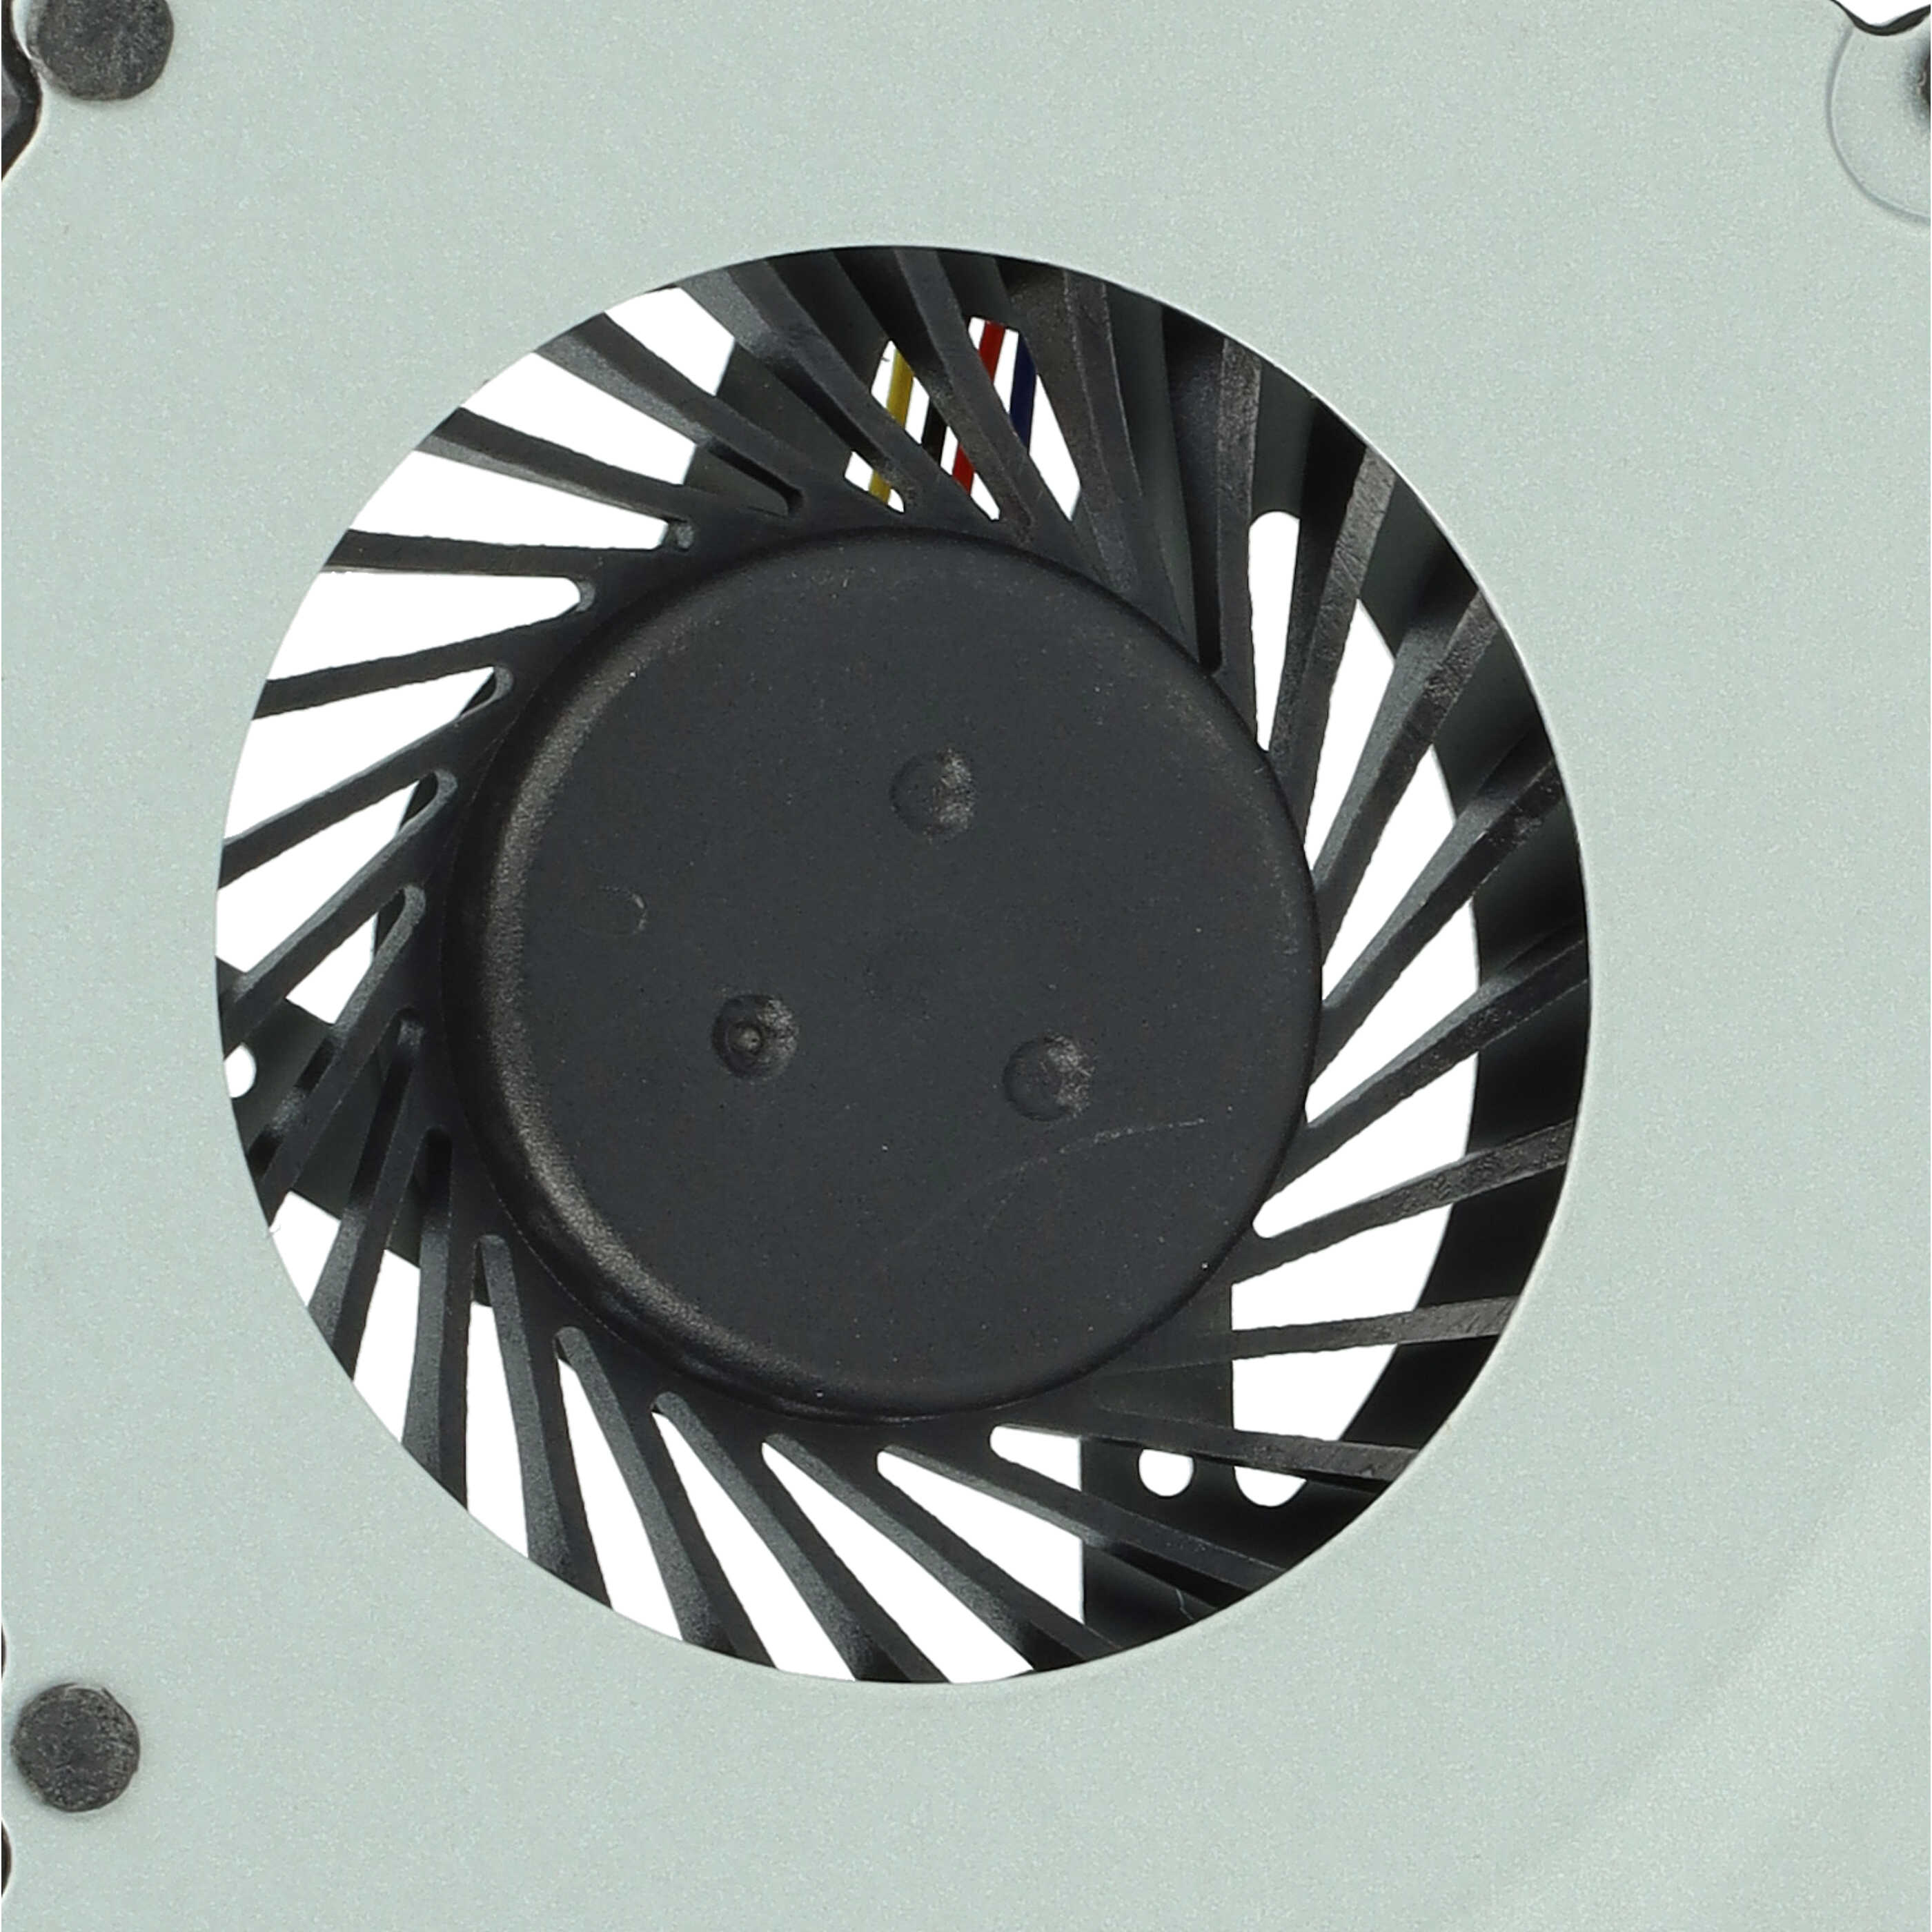 CPU / GPU Fan suitable for Asus K55X Notebook 108 x 89 x 16 mm